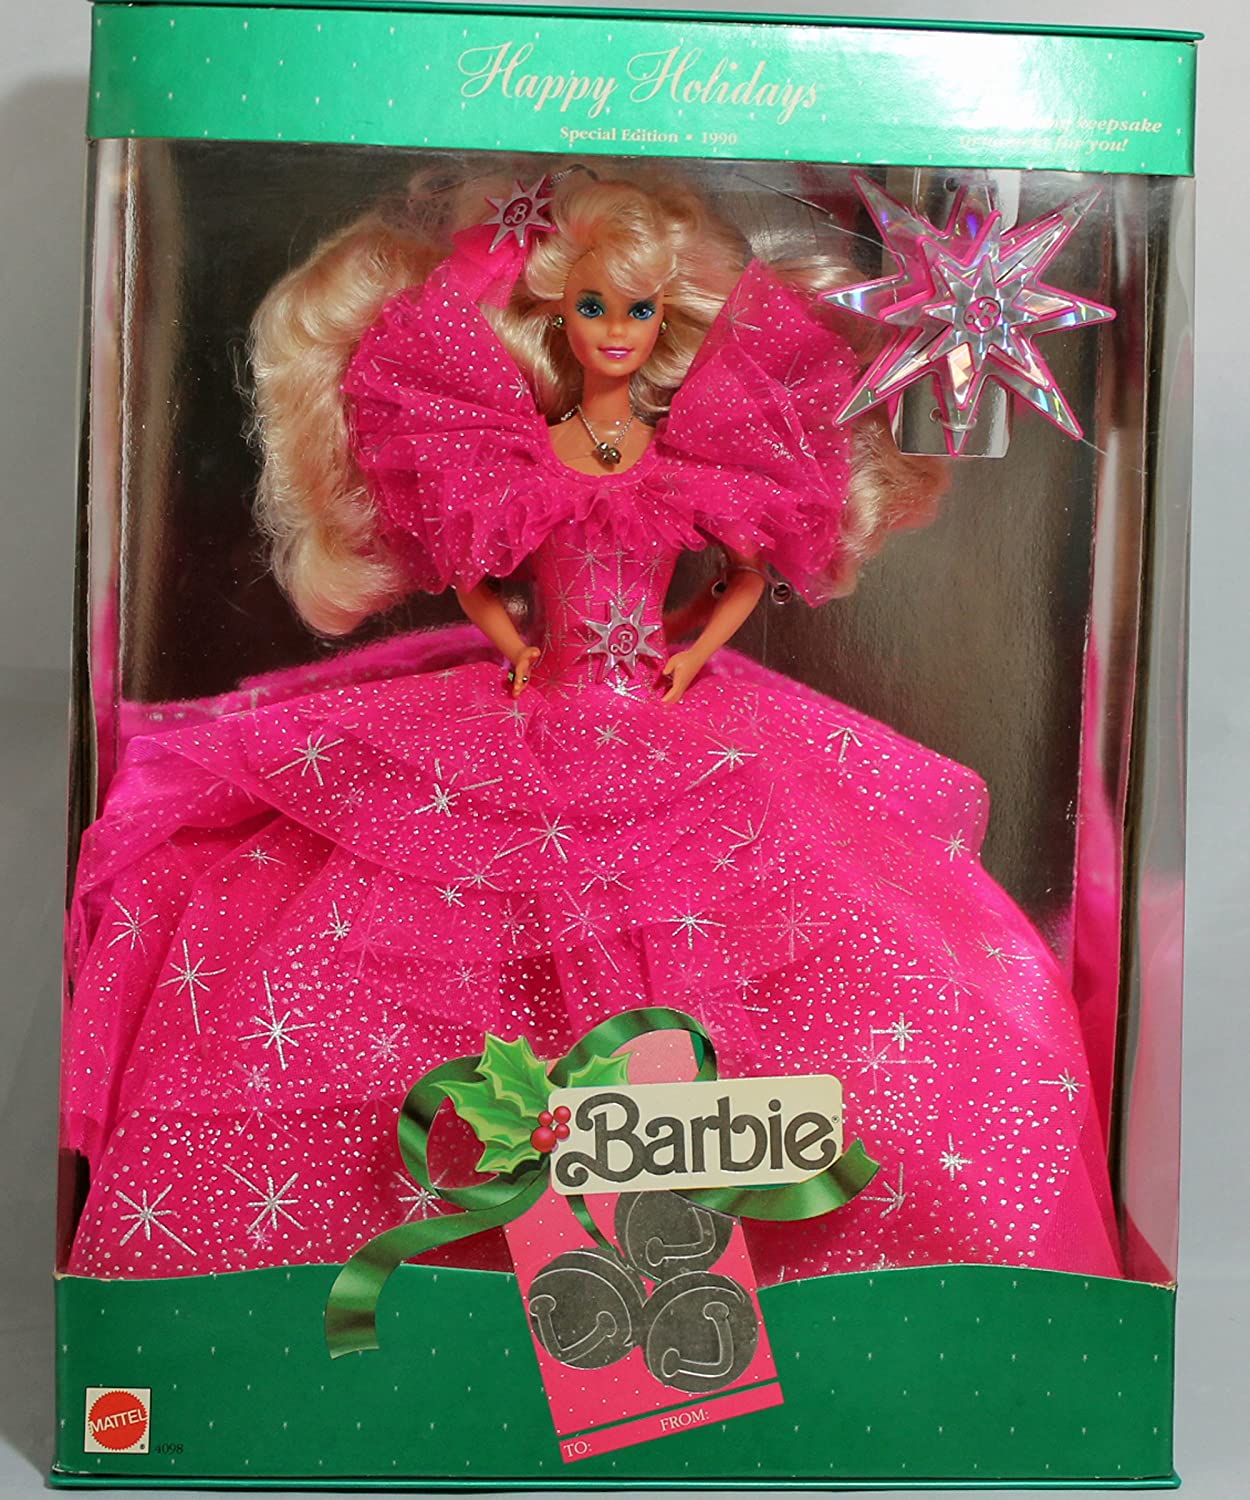 Barbie 1990 Happy Holidays: Sell2BBNovelties.com: Sell TY Beanie Babies